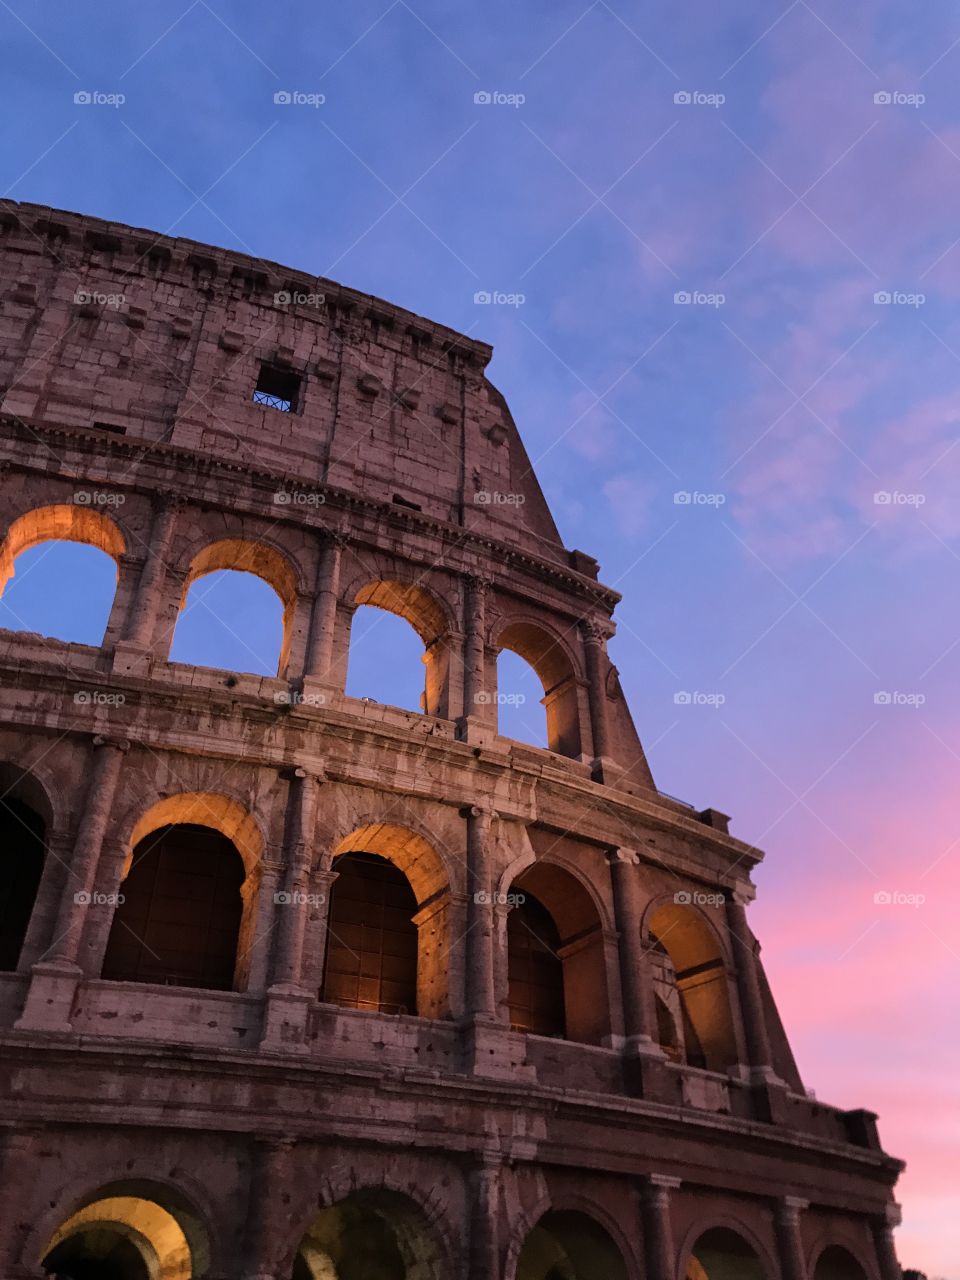 The ancient Colosseum of Rome.